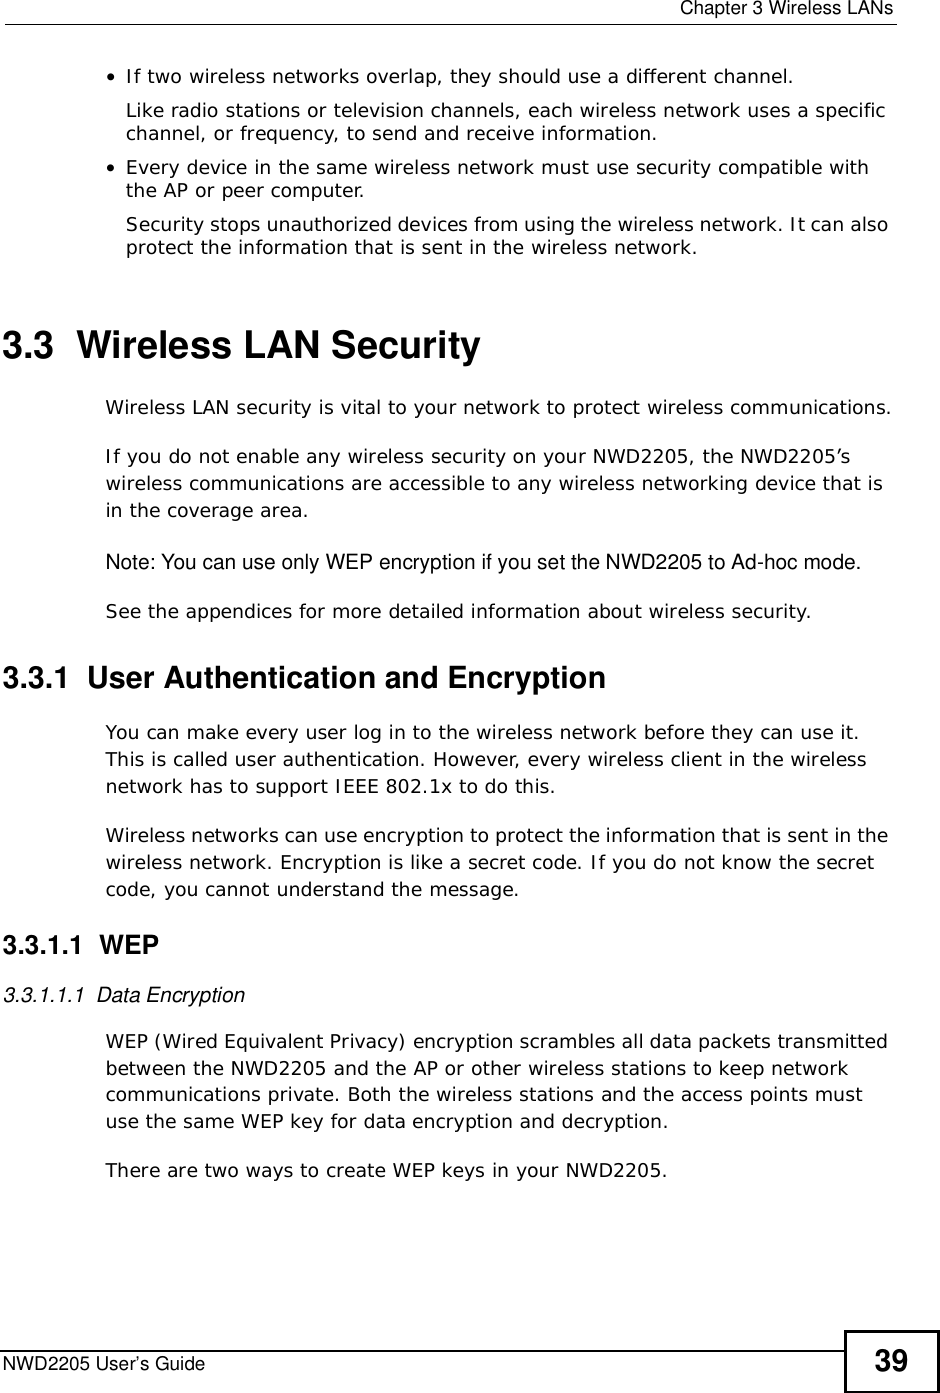  Chapter 3Wireless LANsNWD2205 User’s Guide 39•If two wireless networks overlap, they should use a different channel.Like radio stations or television channels, each wireless network uses a specific channel, or frequency, to send and receive information.•Every device in the same wireless network must use security compatible with the AP or peer computer.Security stops unauthorized devices from using the wireless network. It can also protect the information that is sent in the wireless network.3.3  Wireless LAN Security Wireless LAN security is vital to your network to protect wireless communications.If you do not enable any wireless security on your NWD2205, the NWD2205’s wireless communications are accessible to any wireless networking device that is in the coverage area. Note: You can use only WEP encryption if you set the NWD2205 to Ad-hoc mode.See the appendices for more detailed information about wireless security.3.3.1  User Authentication and EncryptionYou can make every user log in to the wireless network before they can use it. This is called user authentication. However, every wireless client in the wireless network has to support IEEE 802.1x to do this.Wireless networks can use encryption to protect the information that is sent in the wireless network. Encryption is like a secret code. If you do not know the secret code, you cannot understand the message.3.3.1.1  WEP3.3.1.1.1  Data Encryption WEP (Wired Equivalent Privacy) encryption scrambles all data packets transmitted between the NWD2205 and the AP or other wireless stations to keep network communications private. Both the wireless stations and the access points must use the same WEP key for data encryption and decryption.There are two ways to create WEP keys in your NWD2205.